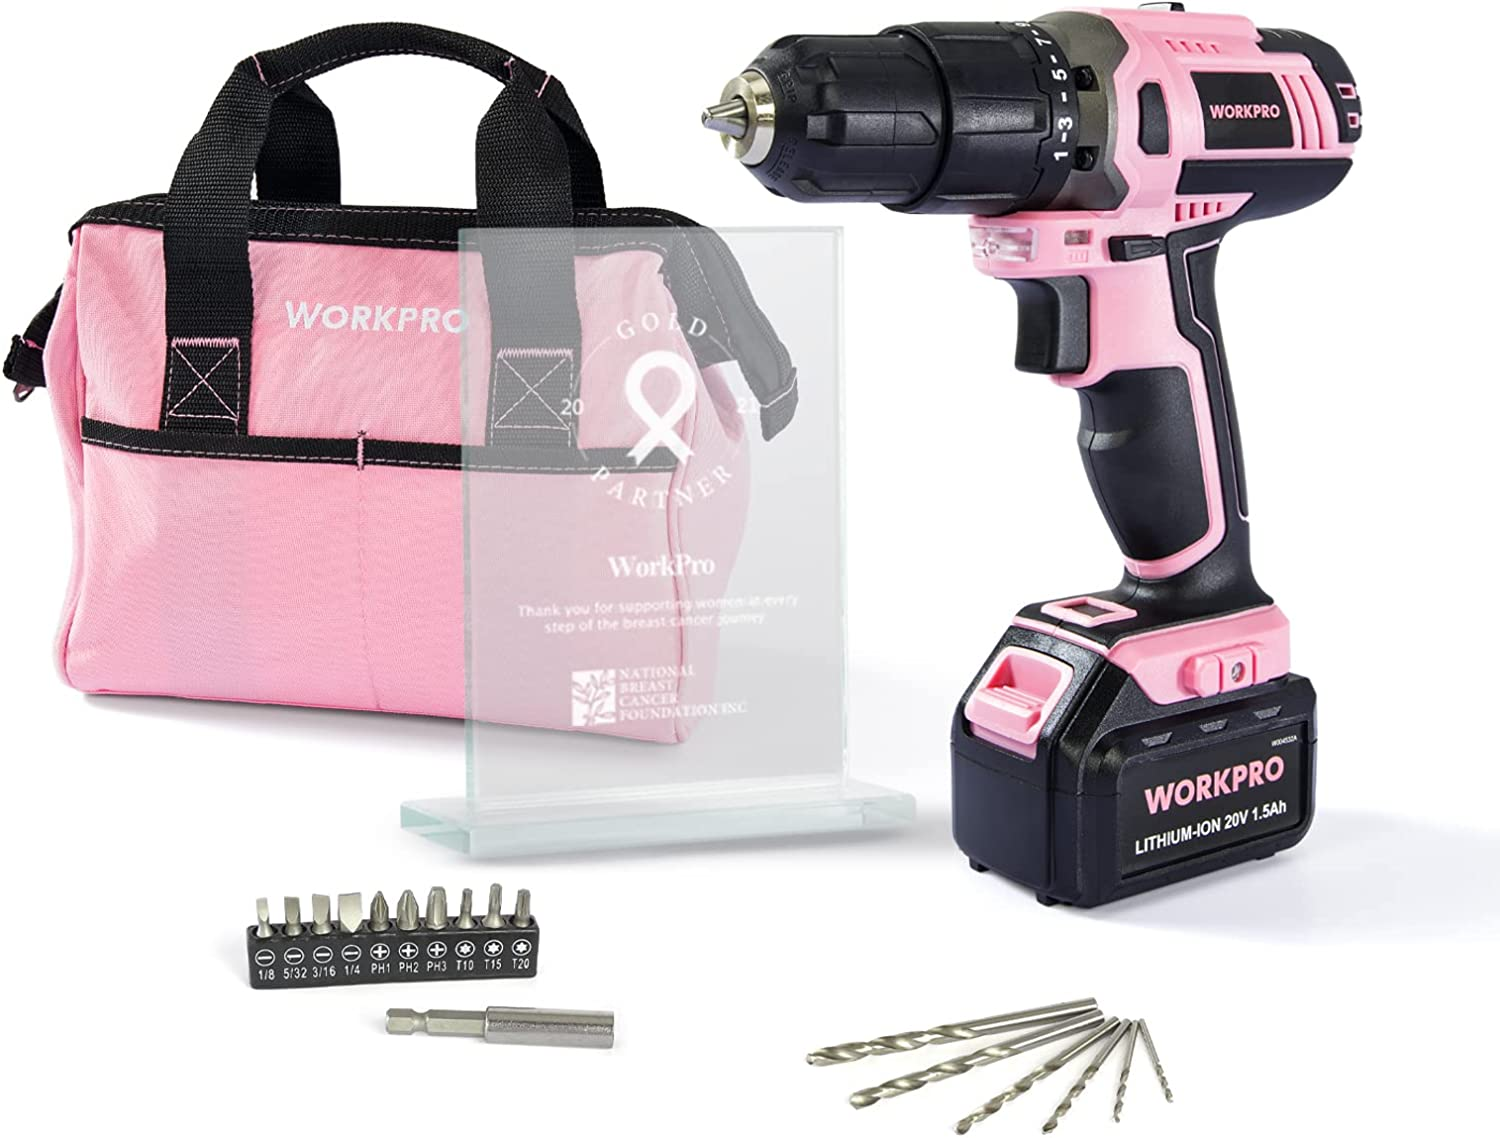 Pink Cordless 20V Lithium-Ion Drill Driver Set, 1 Battery, Charger and Storage Bag Included - Pink Ribbon